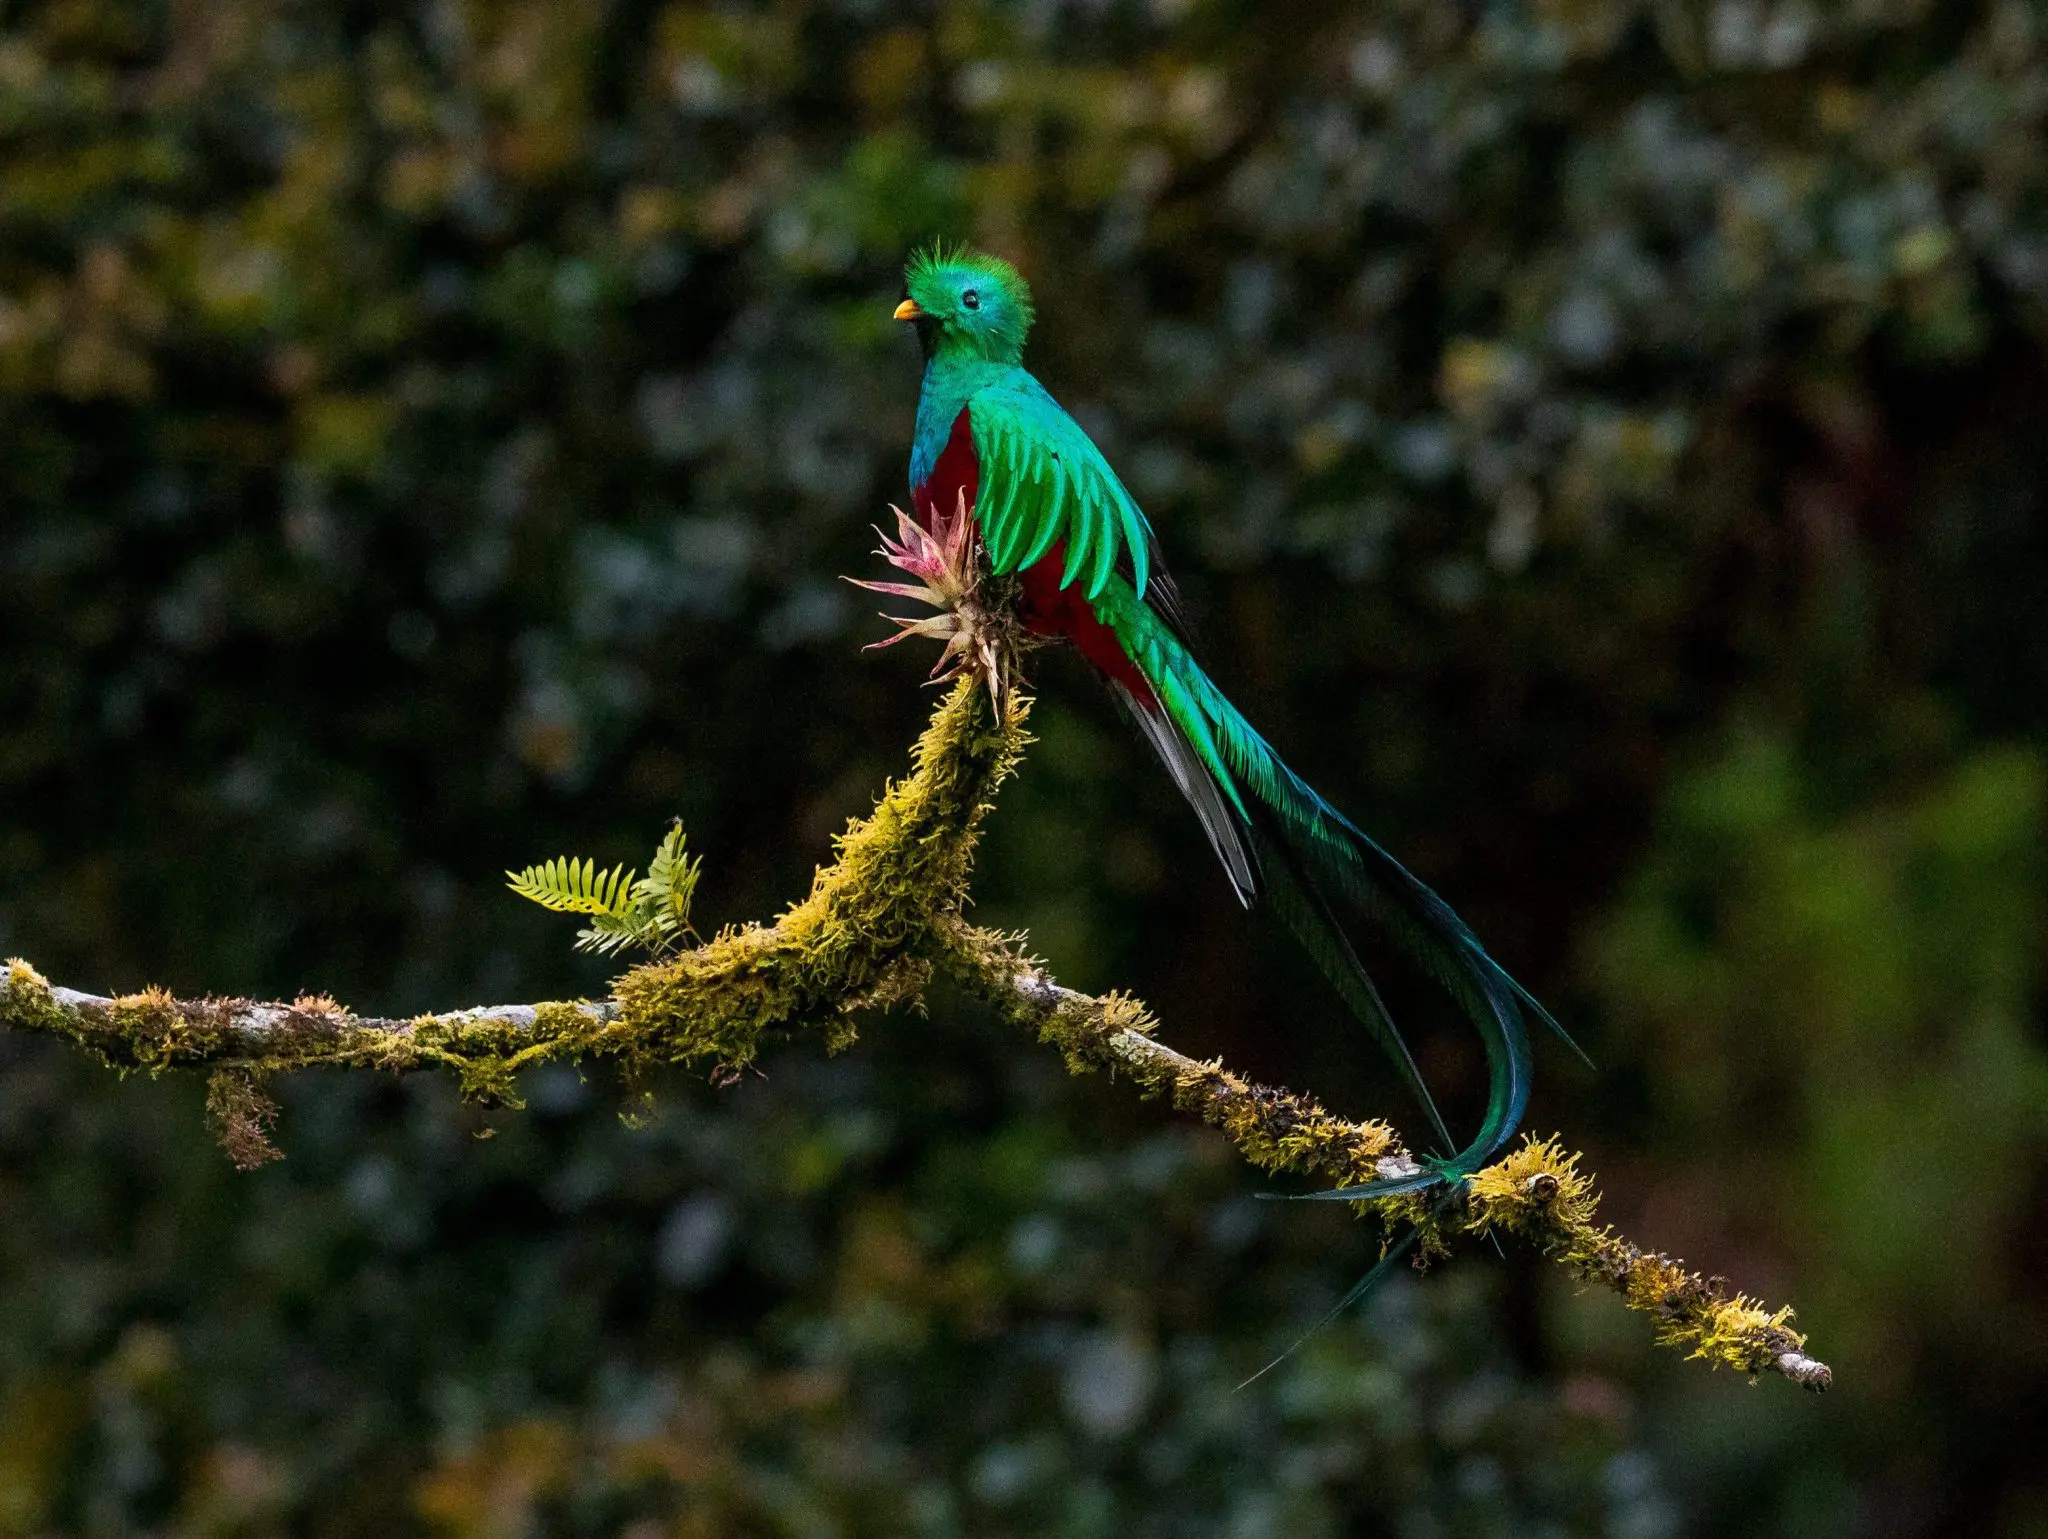 Costa Rica’s Cloud Forests